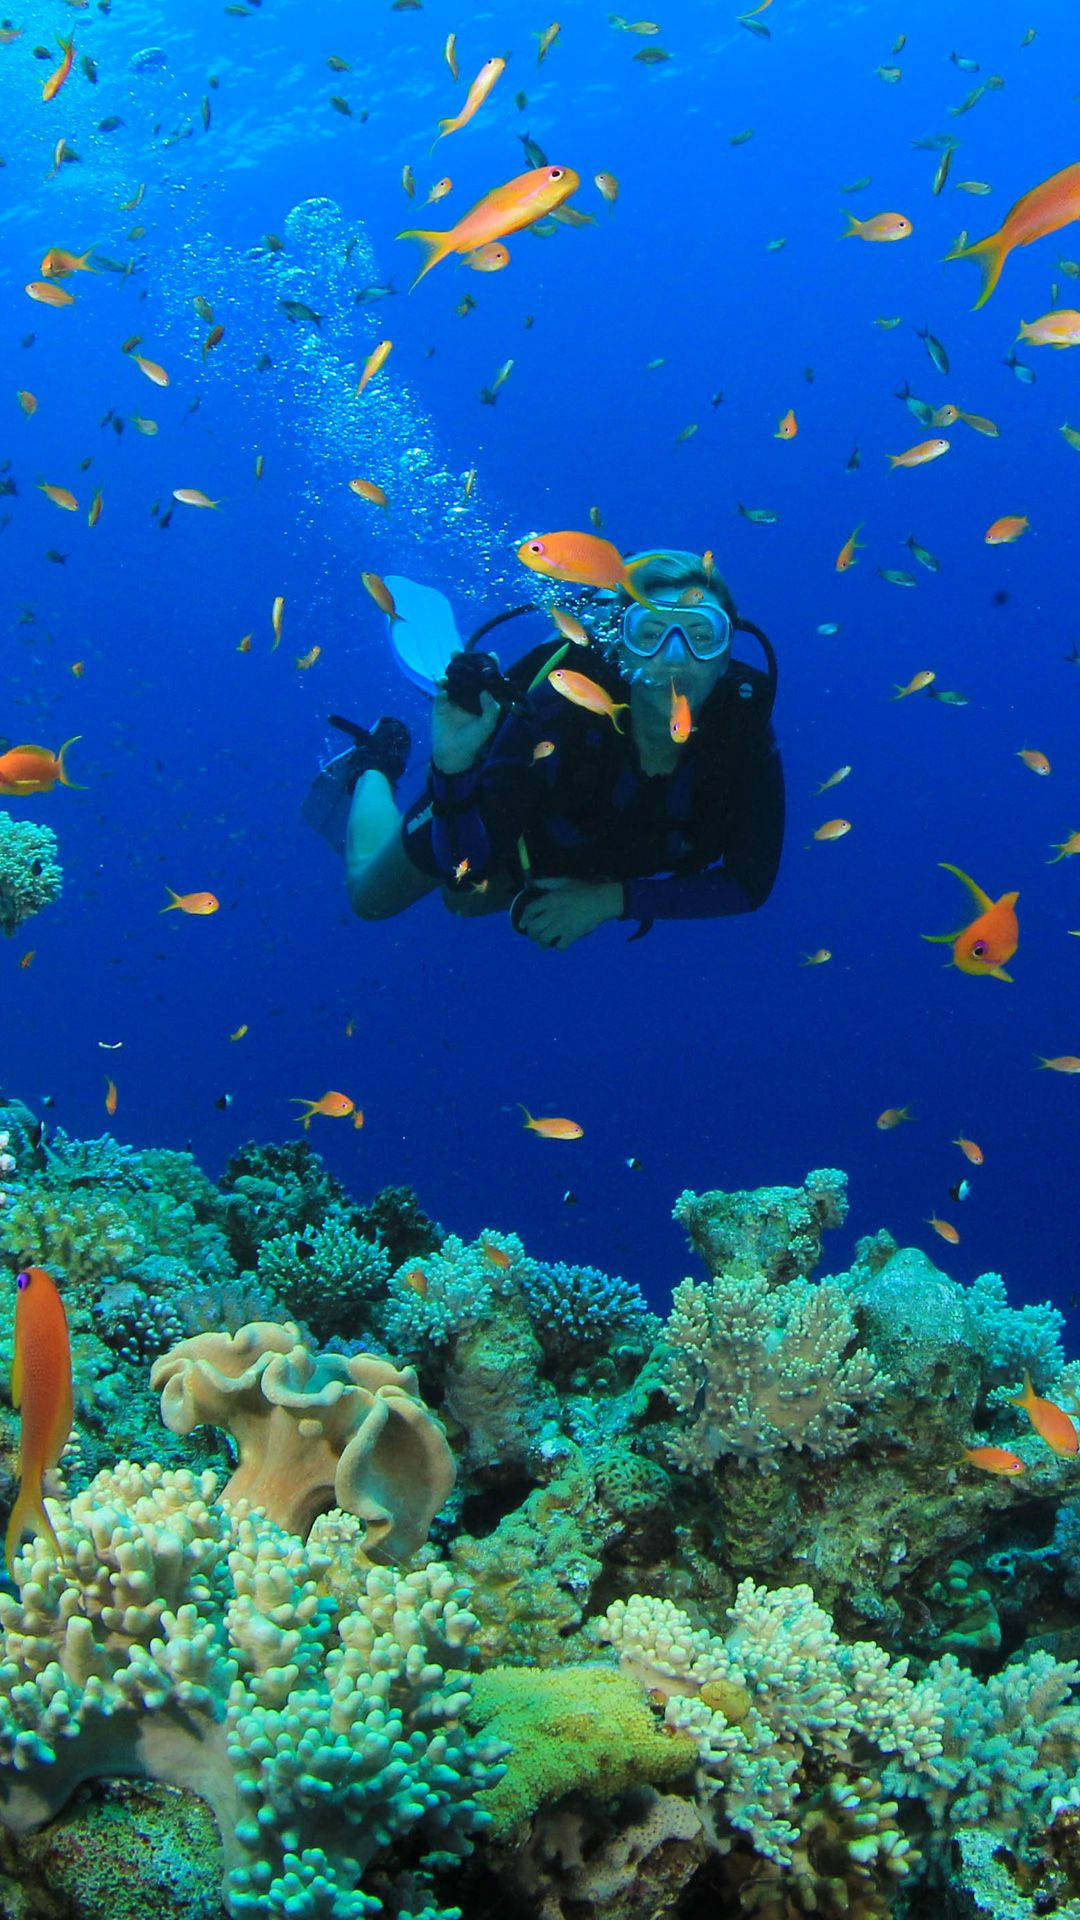 Scuba Diving With Small Orange Fishes Wallpaper